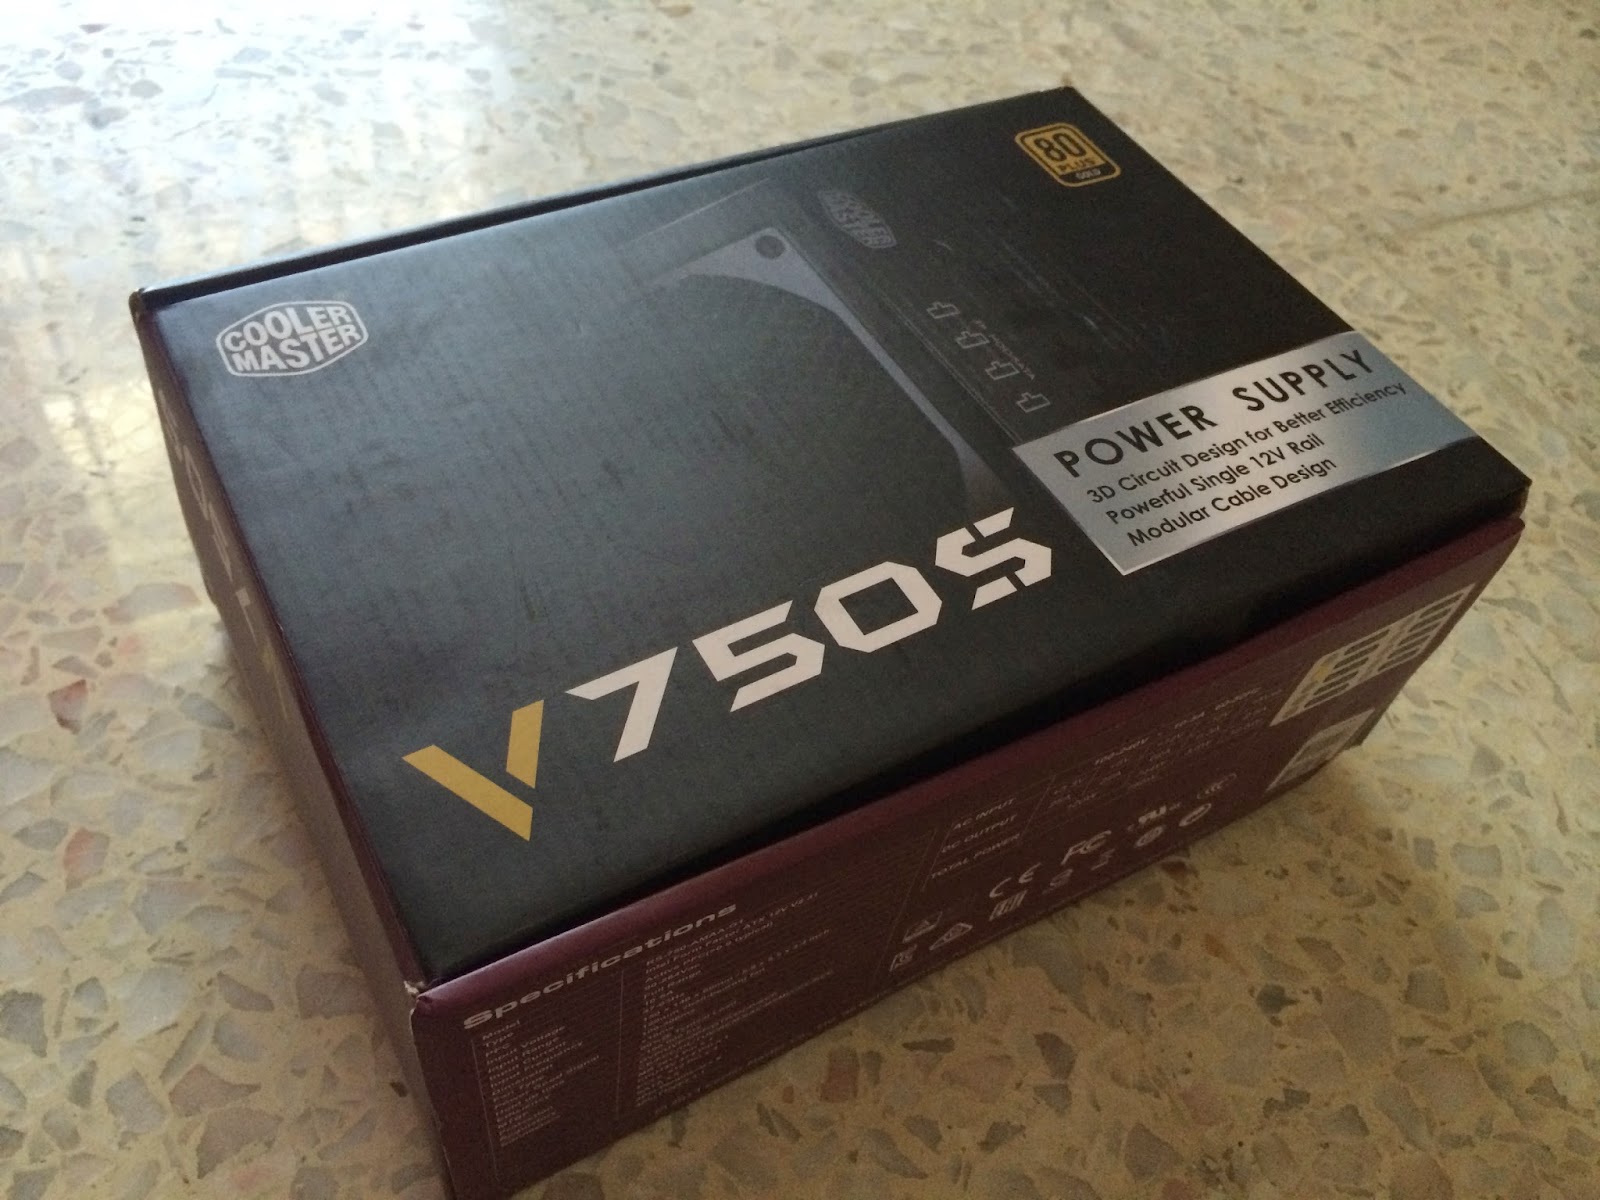 Cooler Master V750S Power Supply Unboxing & Overview 20